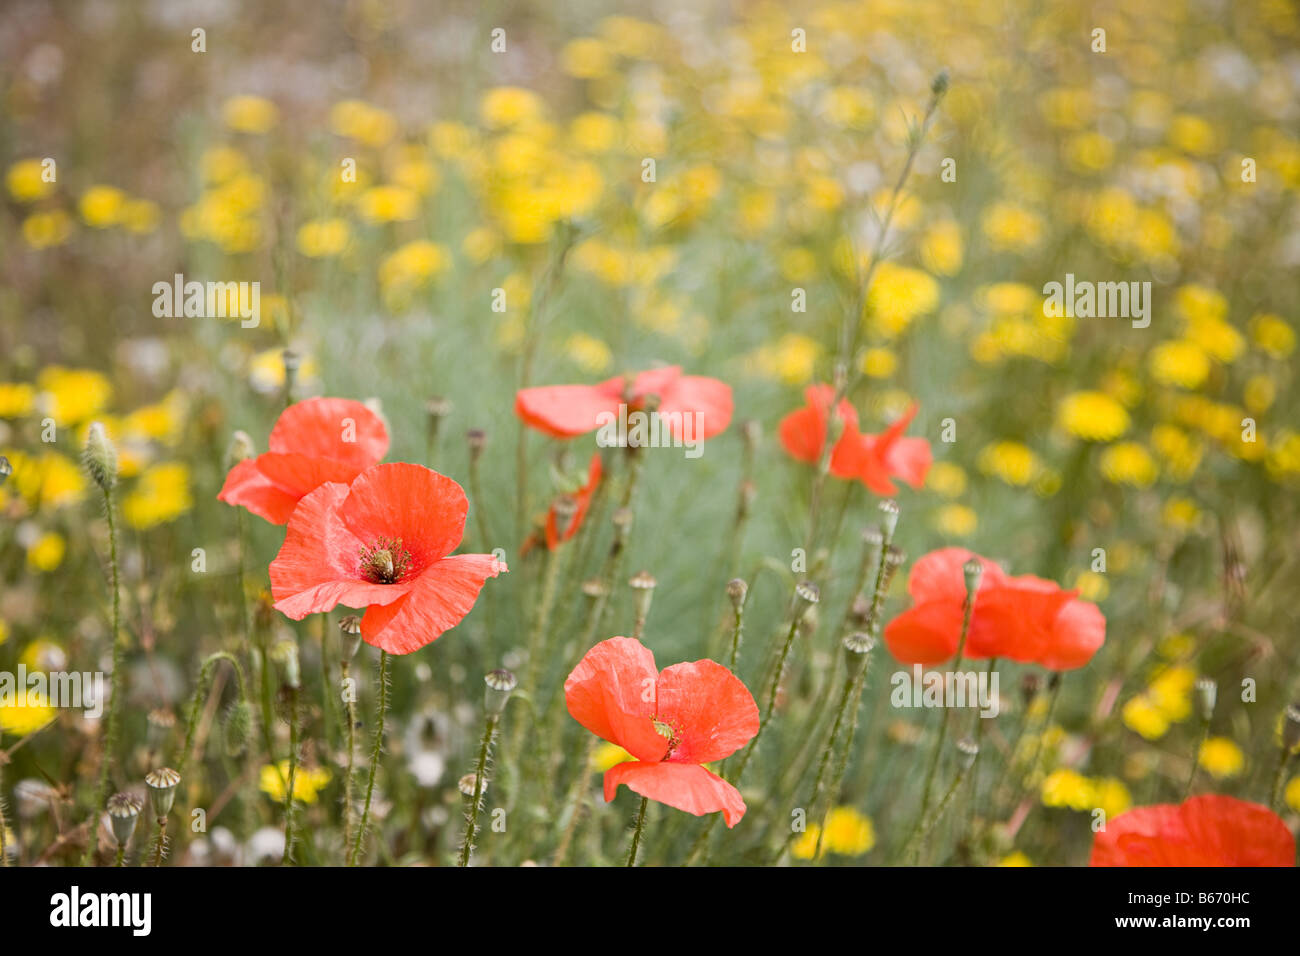 A field of poppies Stock Photo